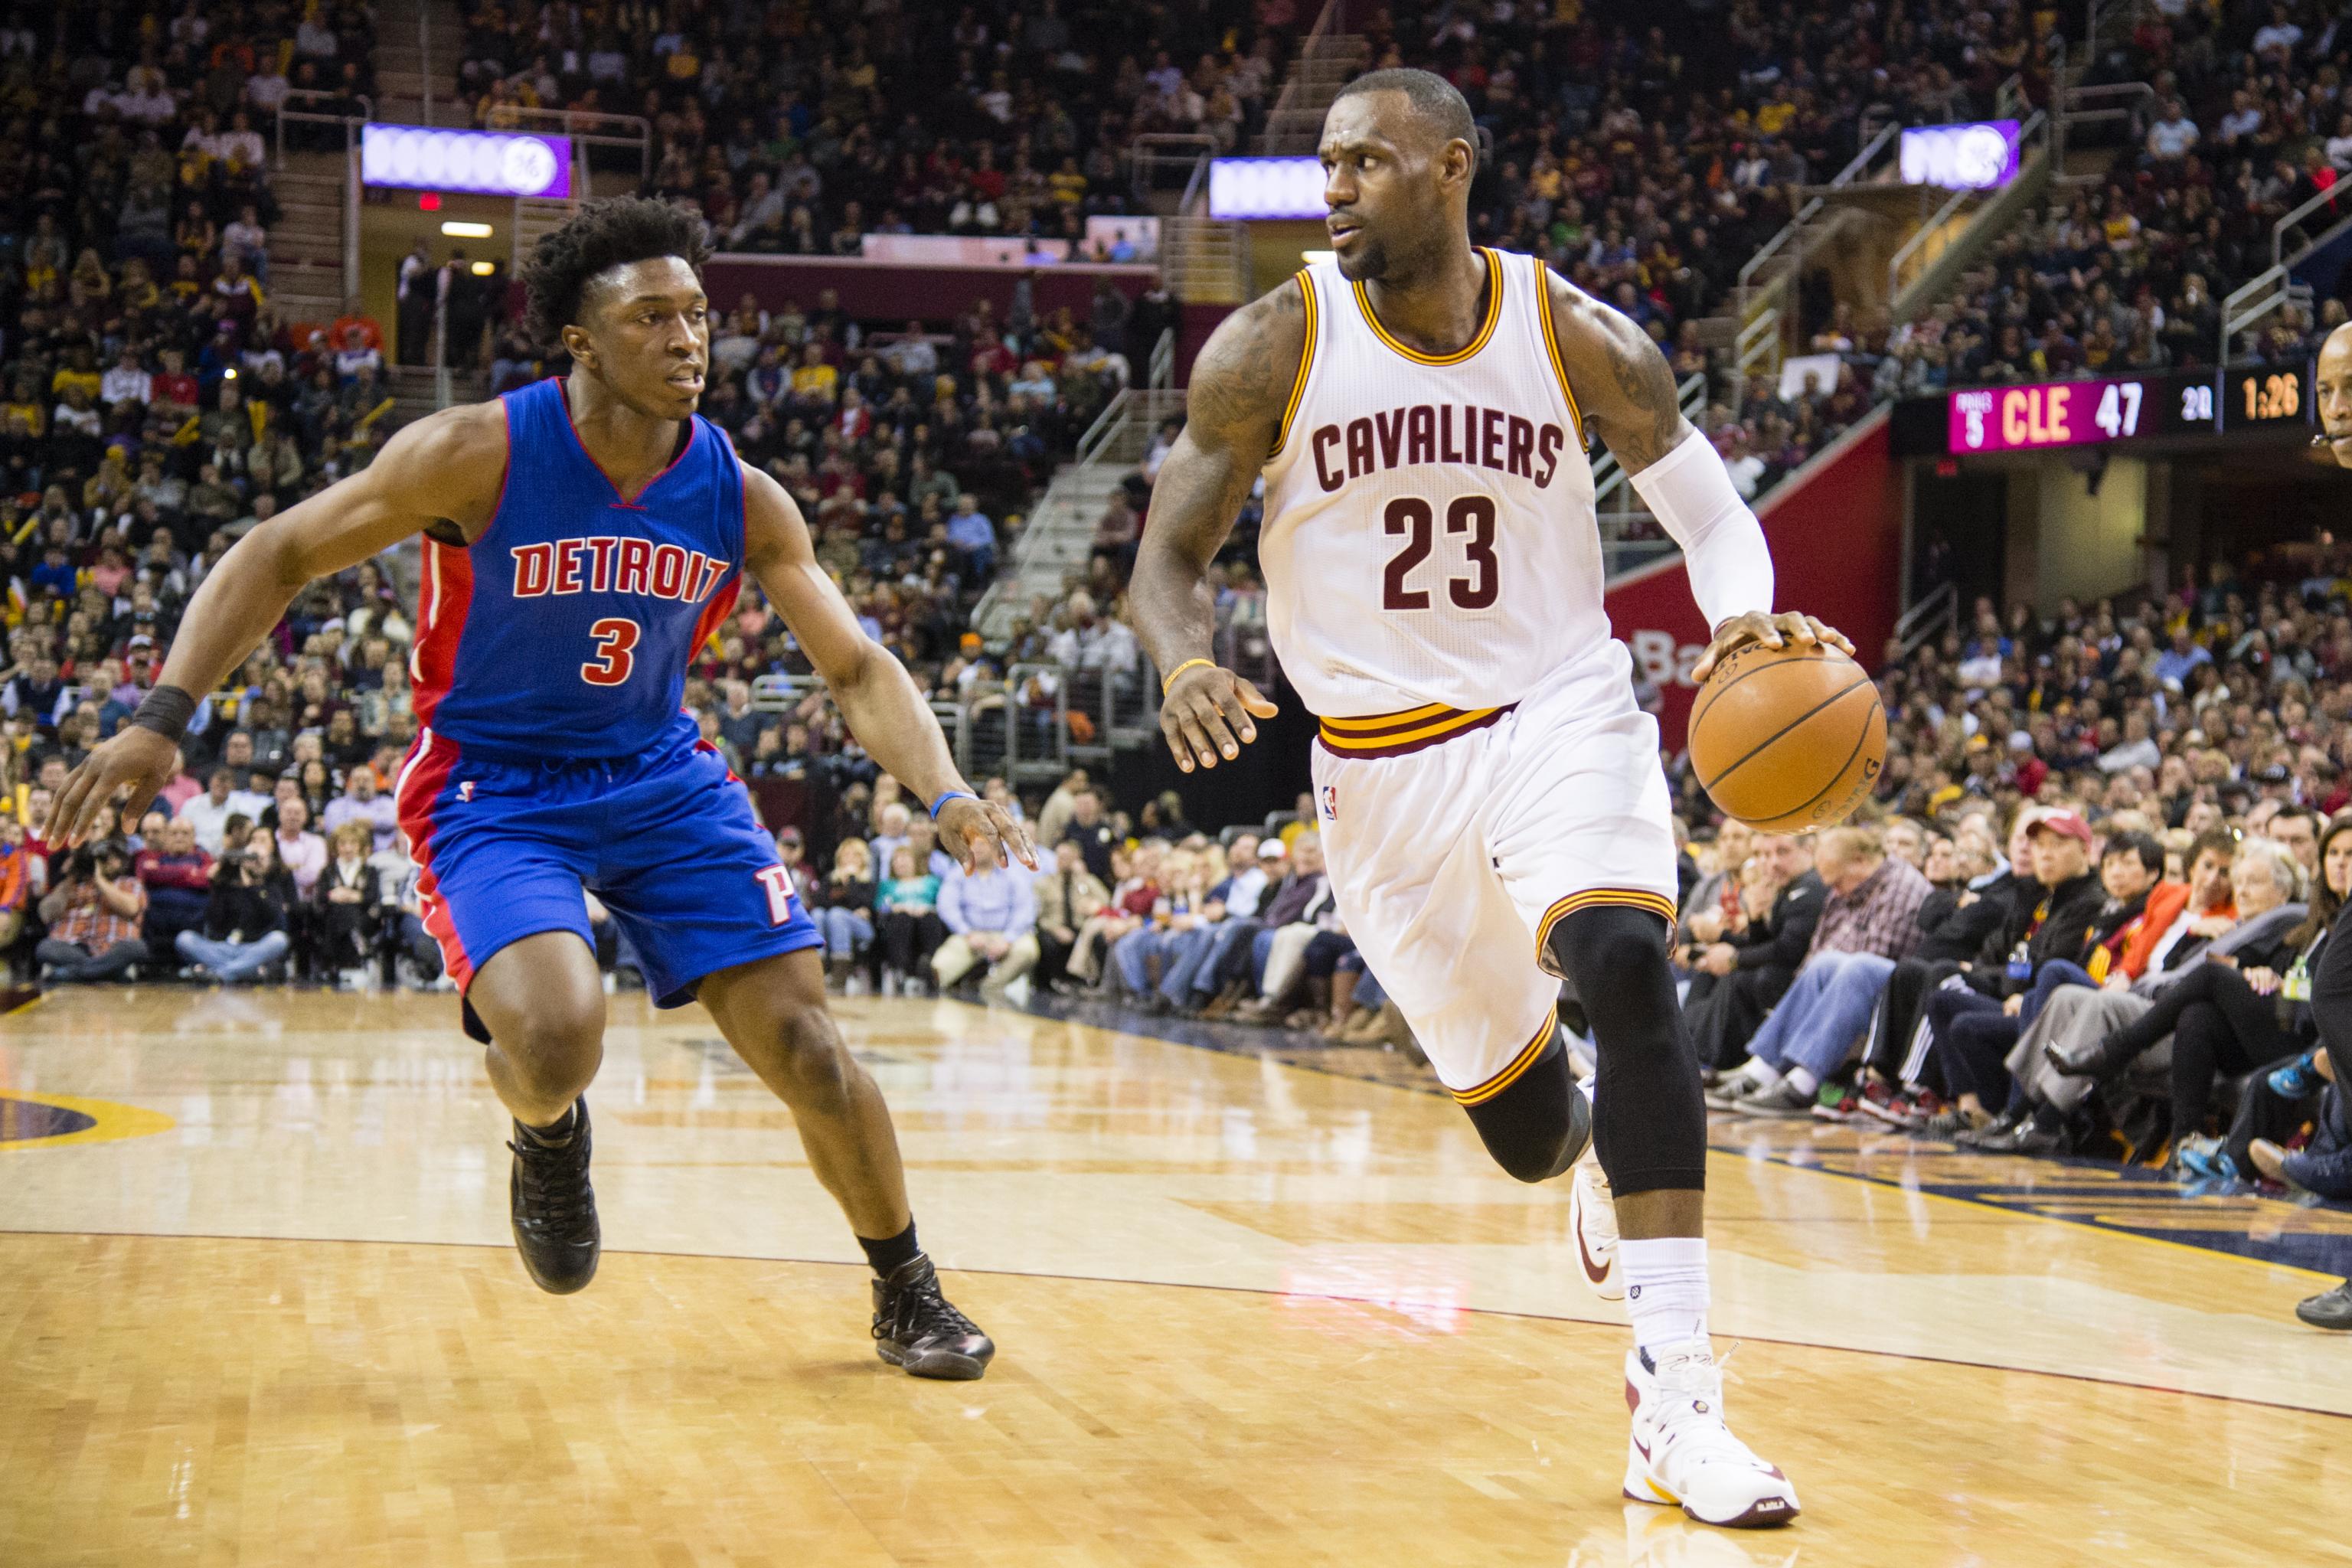 Pistons vs. Cavaliers: Play-by-play, highlights and reactions